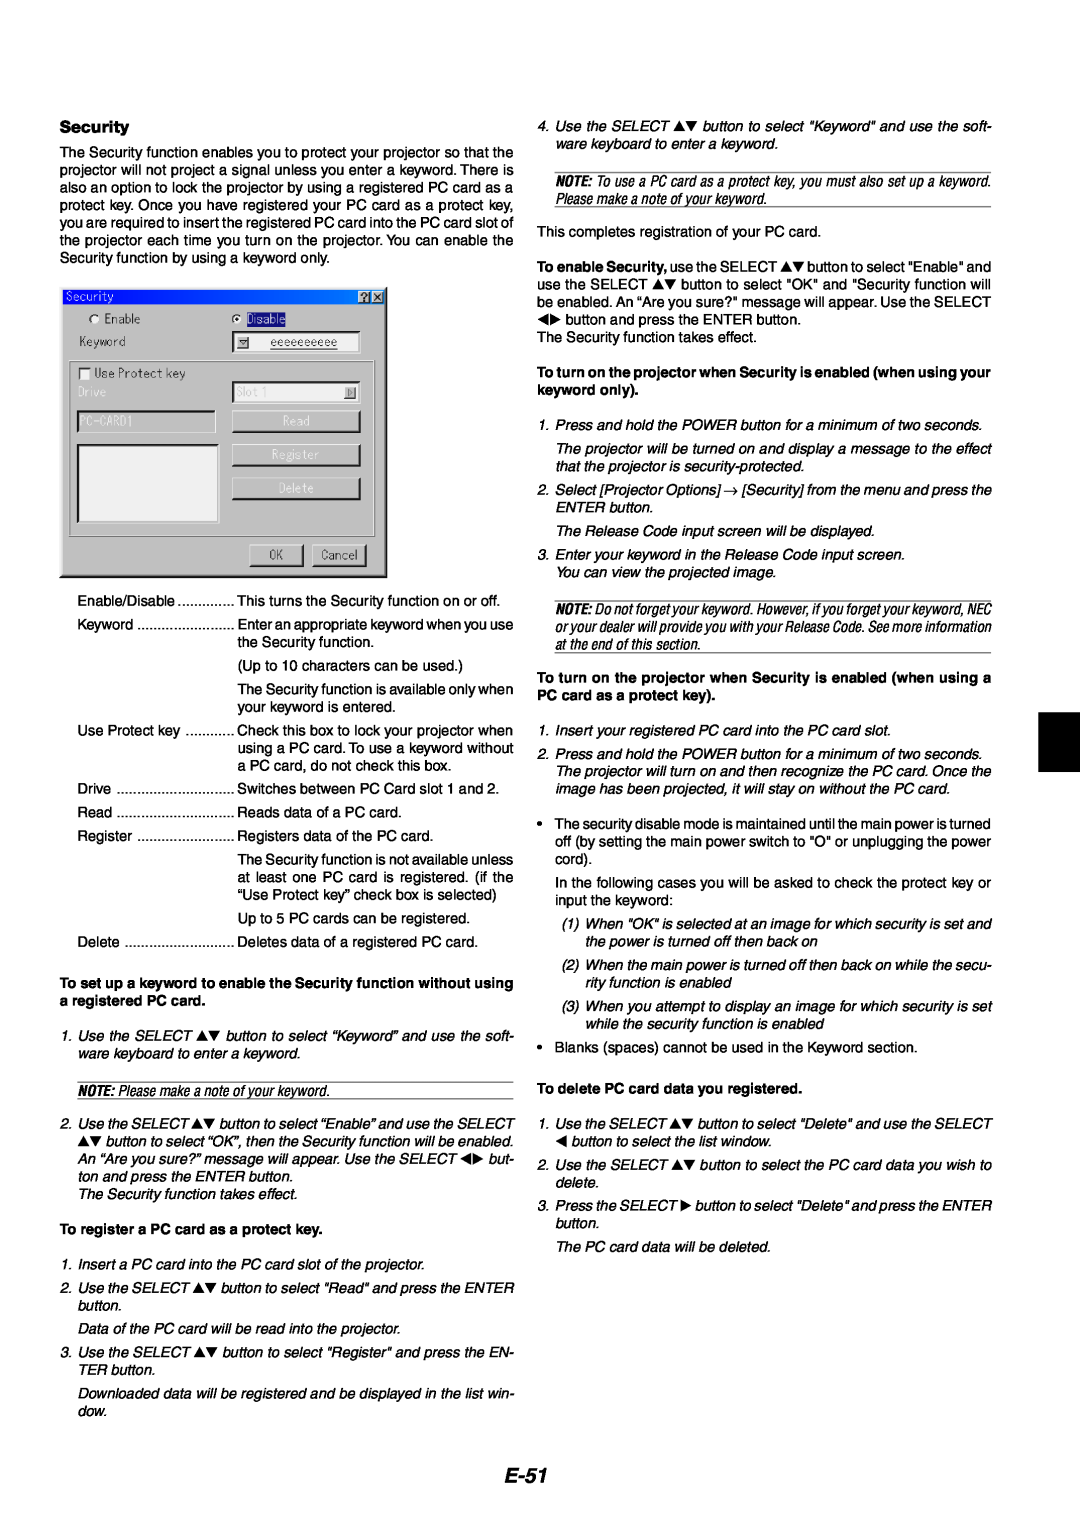 NEC MT1060 user manual E-51, Security, To register a PC card as a protect key 